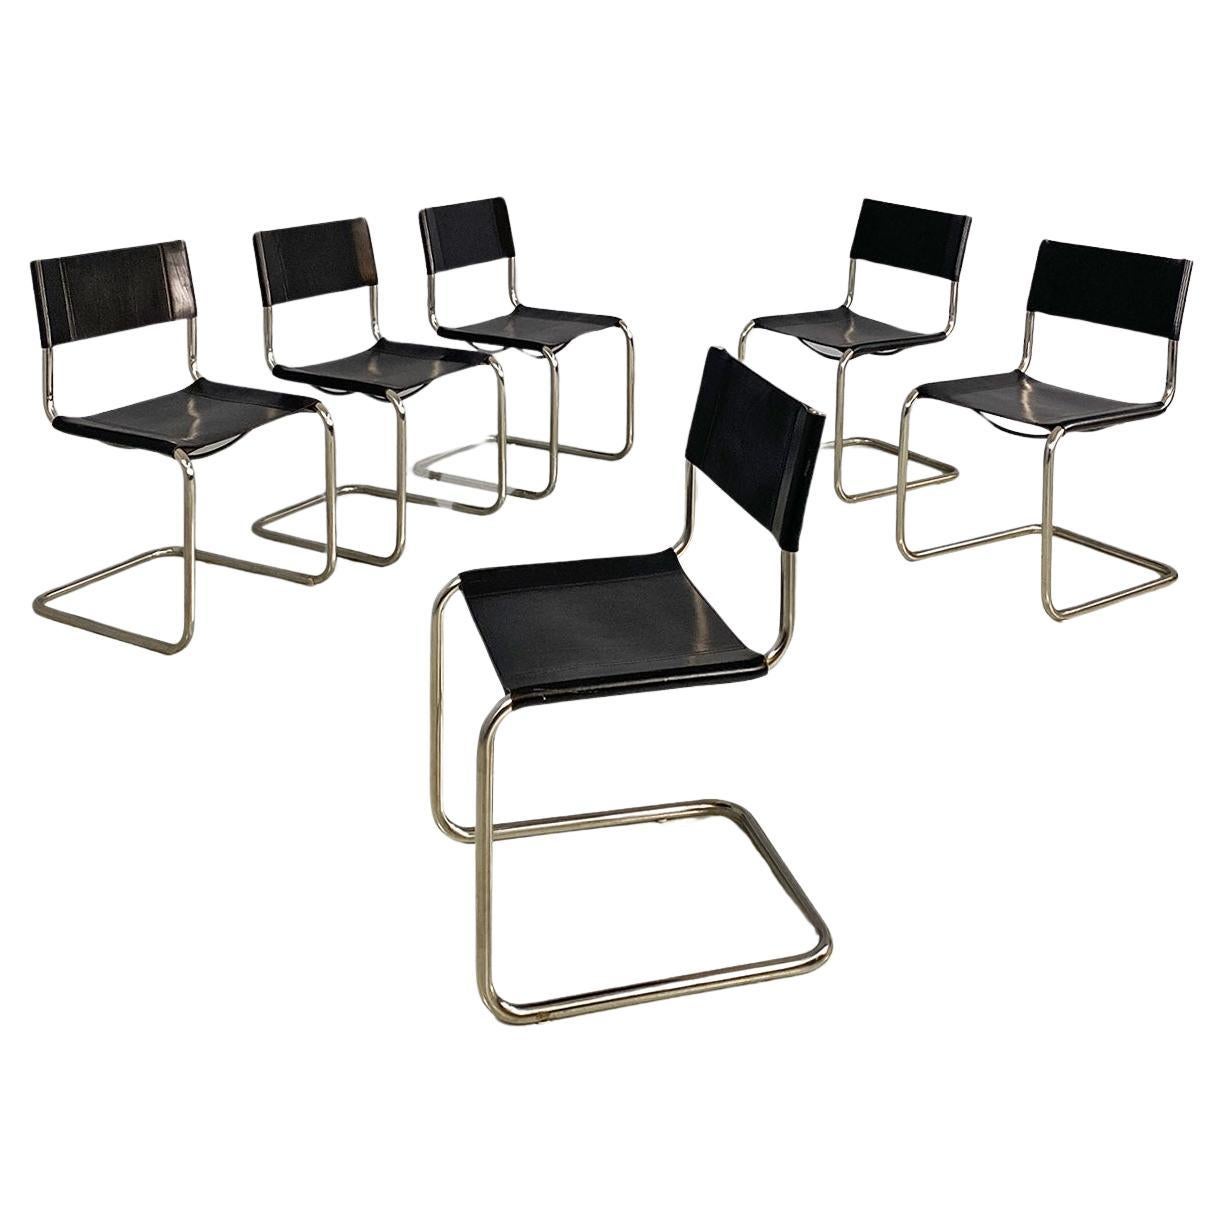 Italian modern black leather and tubolar chromed metal chairs by Zanotta, 1970s For Sale